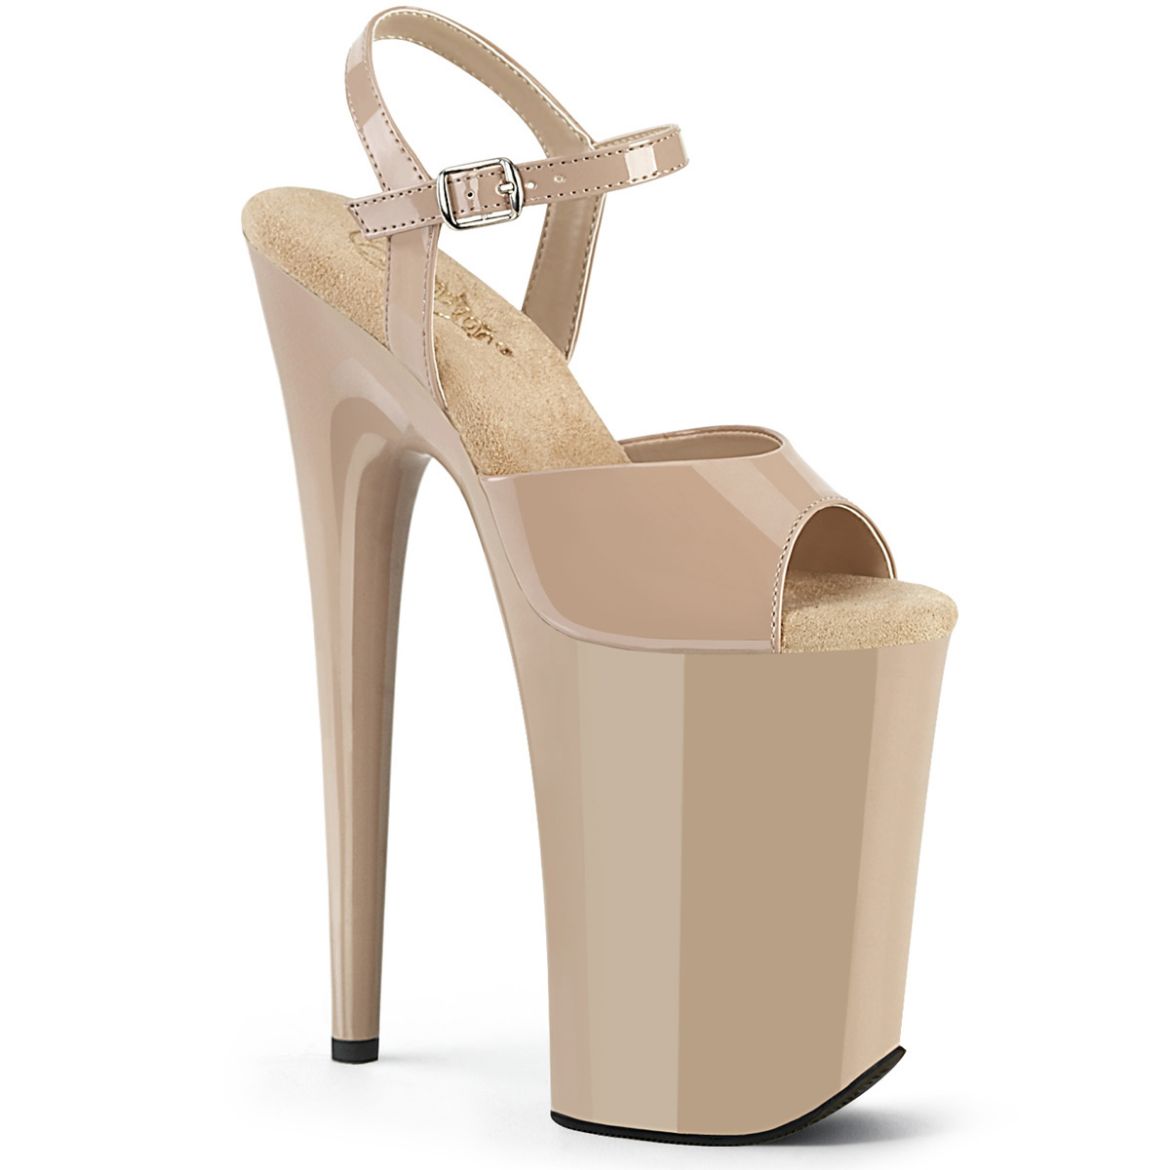 Product image of Pleaser INFINITY-909 Nude Pat/Nude 9 Inch Heel 5 1/4 Inch PF Ankle Strap Sandal